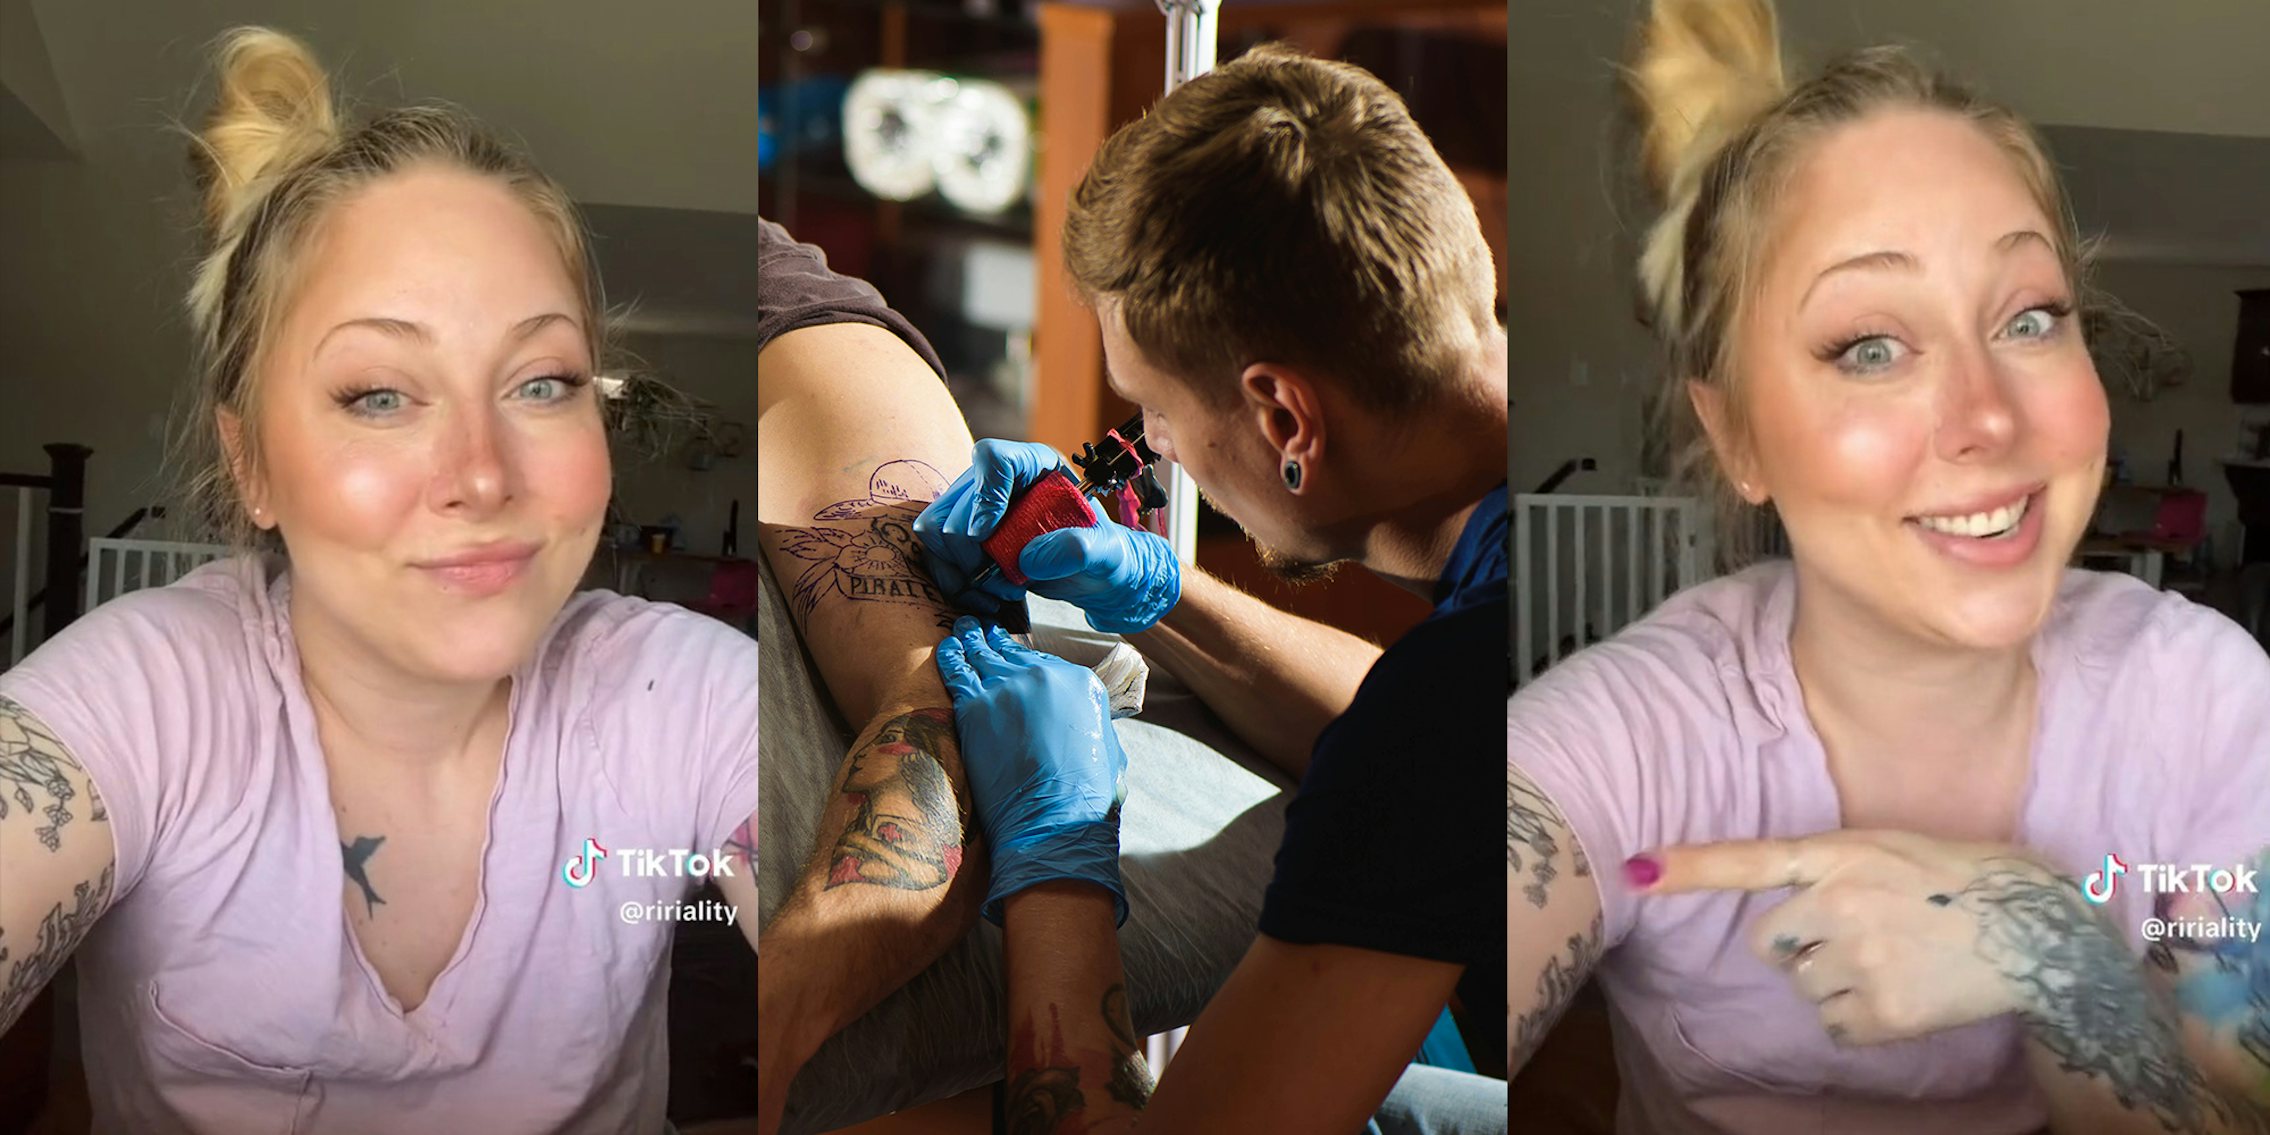 Woman explains that she was scammed out of $4,000 by tattoo artist